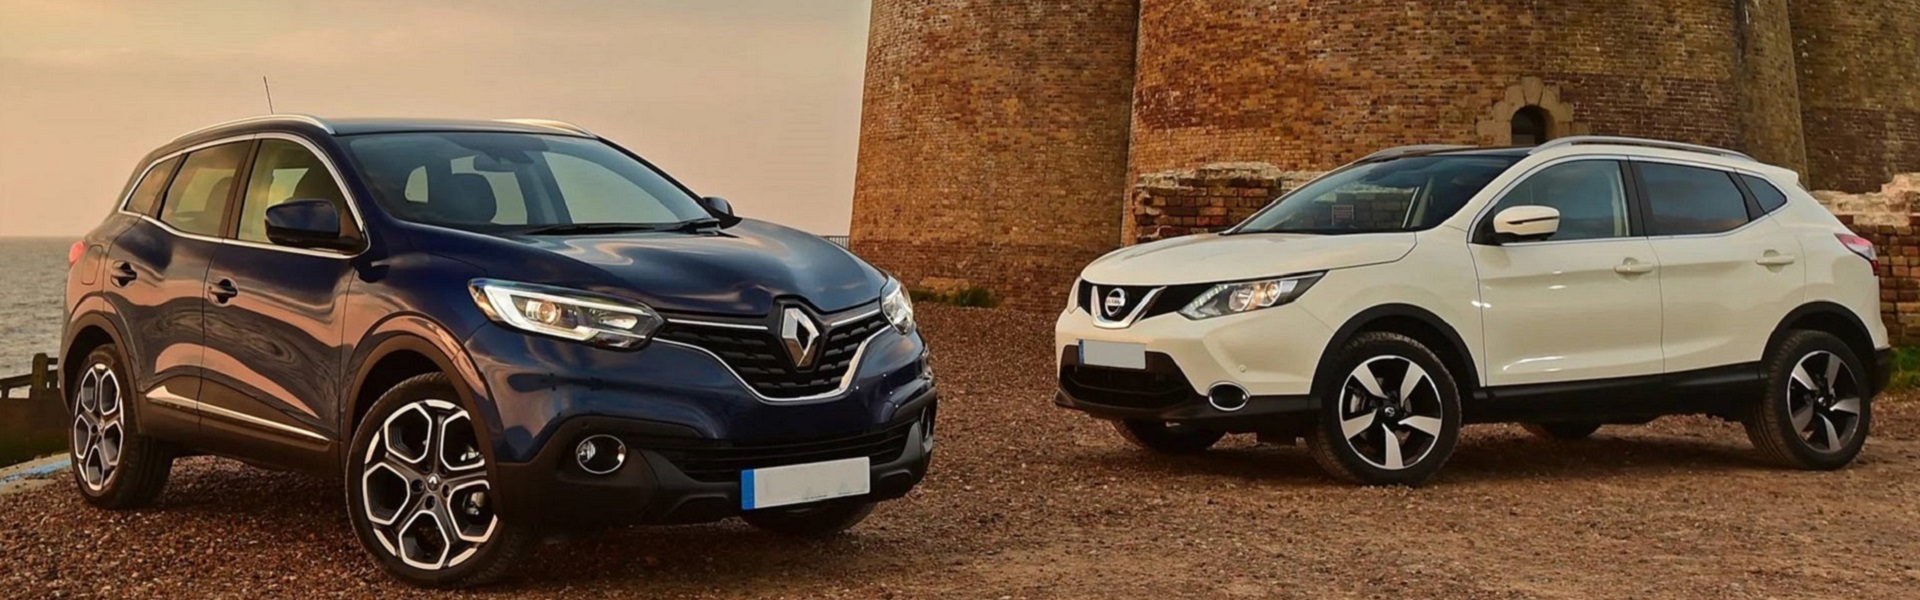 Sale of Renault, Dacia and Nissan vehicles